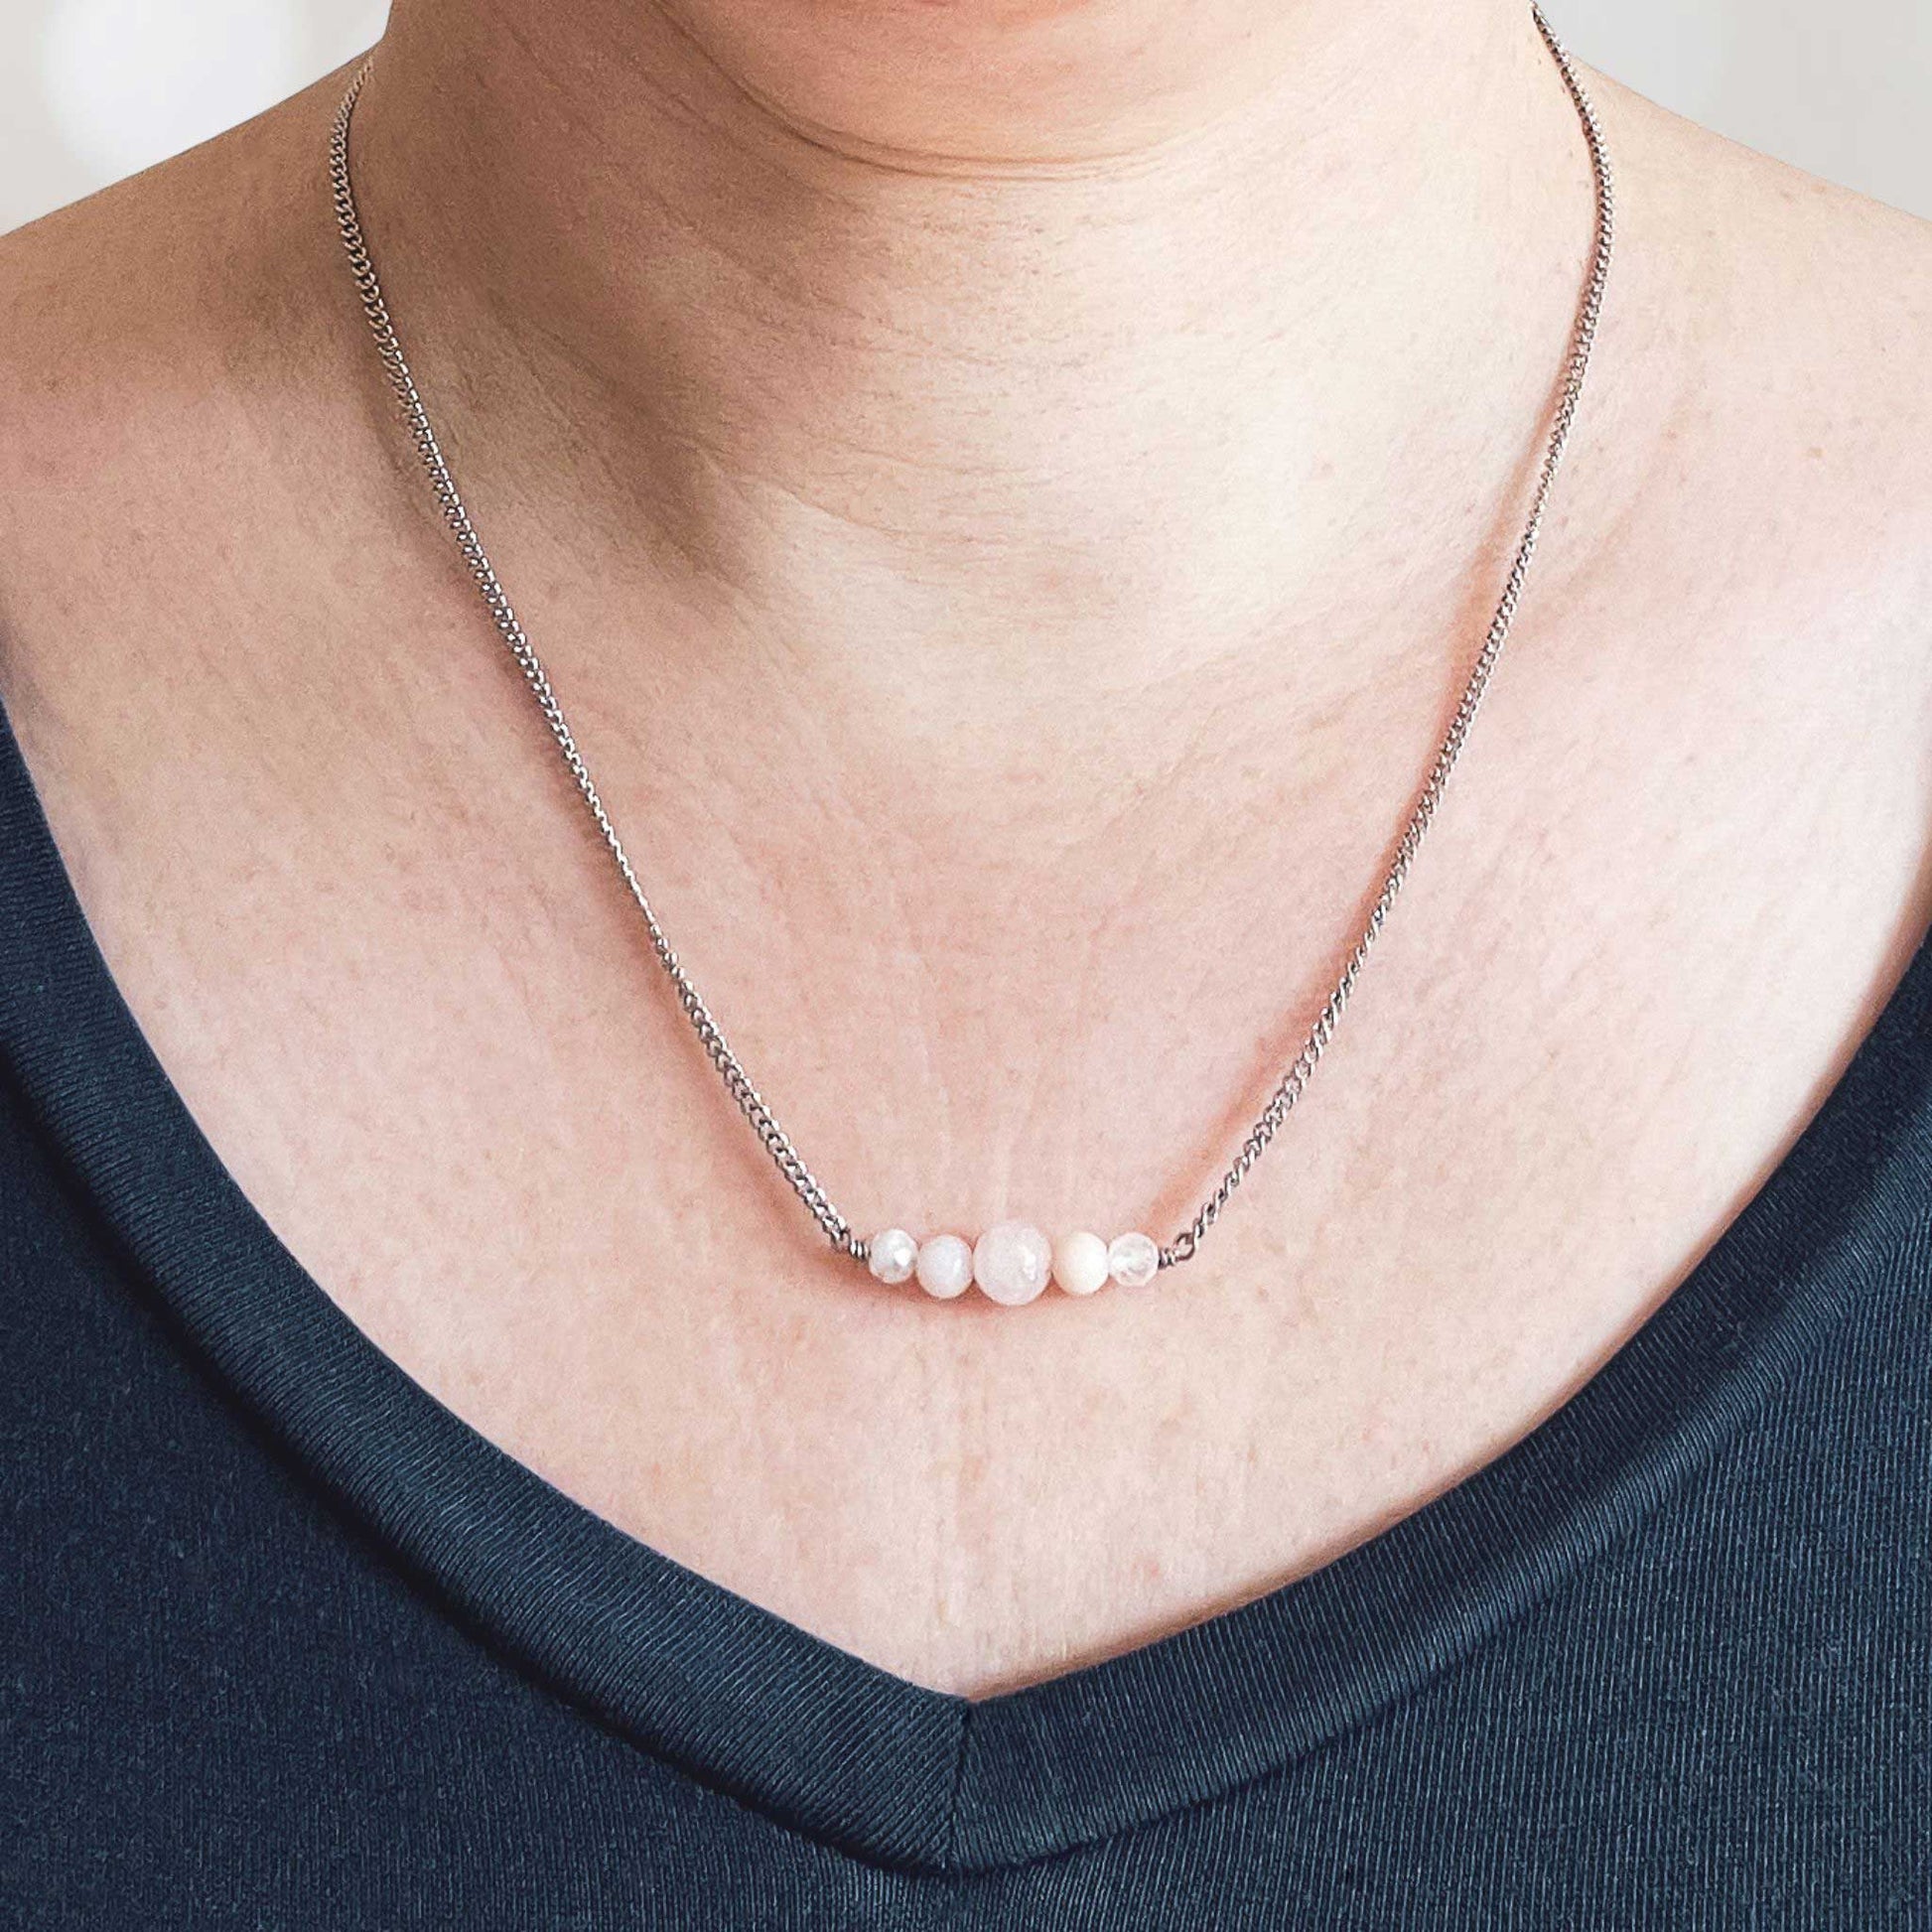 Woman wearing dark blue v neck top and dainty pale pink gemstone necklace